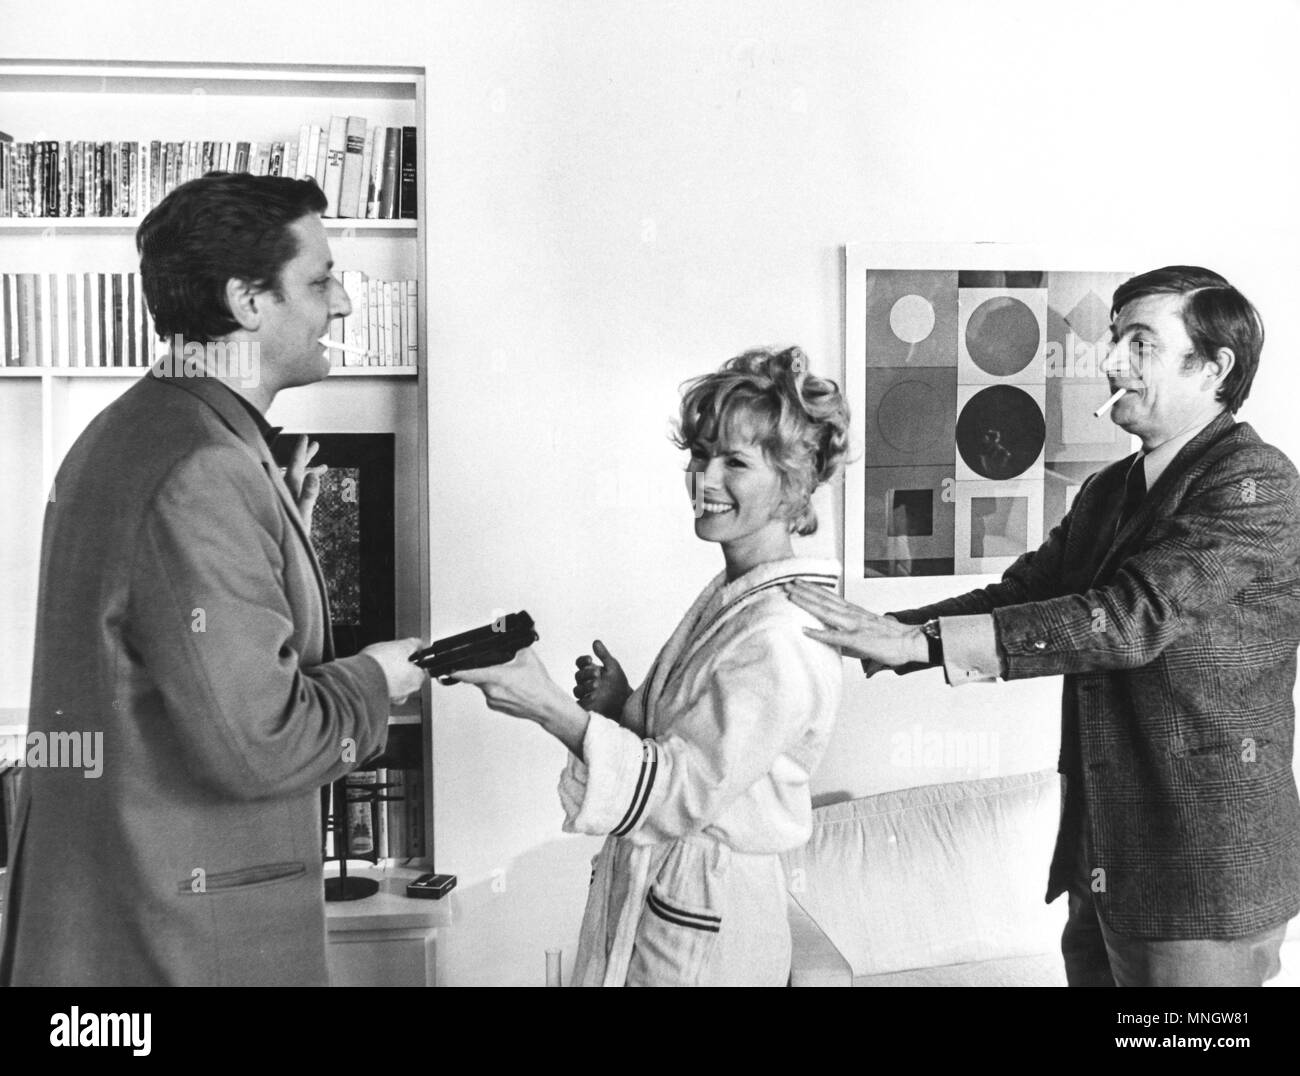 bruno cremer, bibi andersson, jacques doniol-valcroze on set of the movie le viol - overgreppet, 1967 Stock Photo